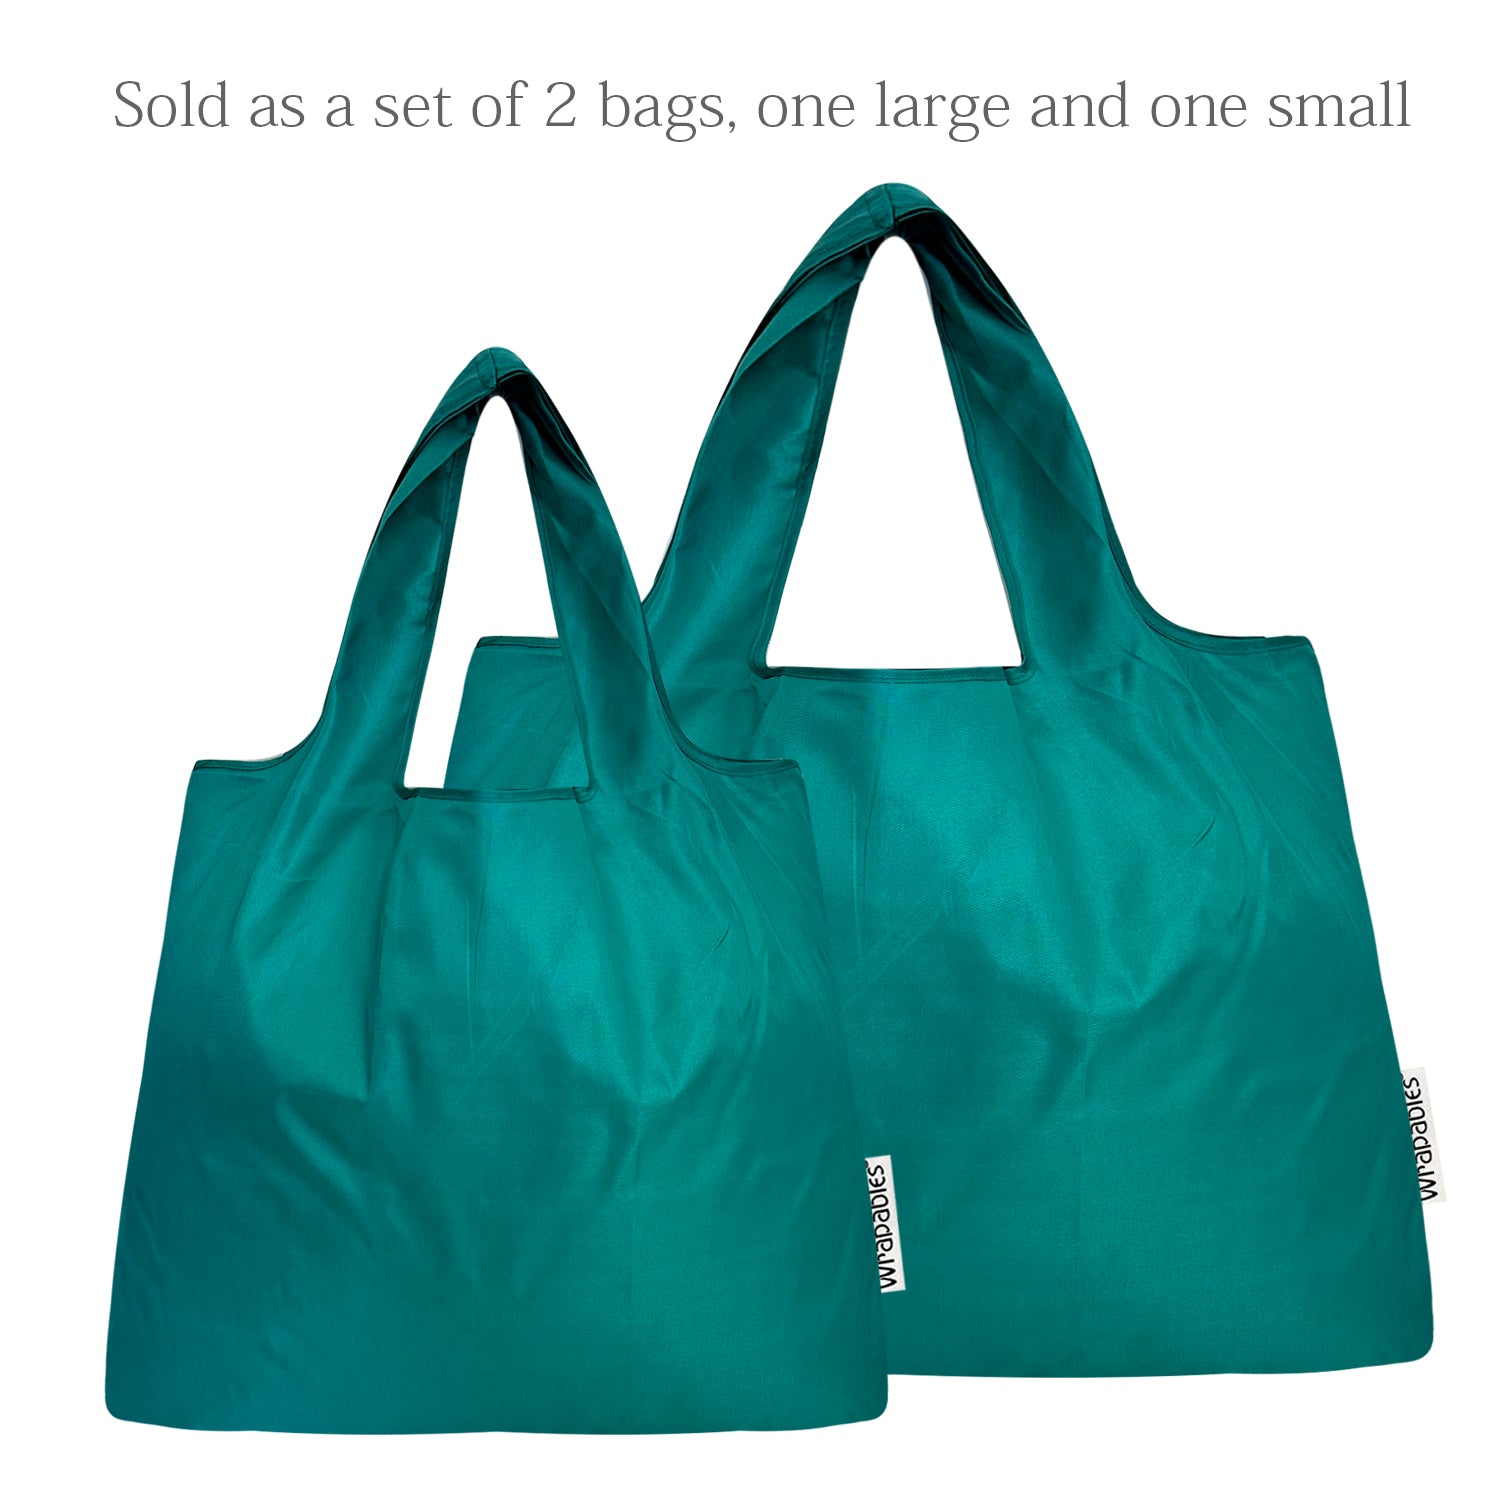 Wrapables Large & Small Foldable Tote Nylon Reusable Grocery Bags, Set of 2, Lime, Women's, Green